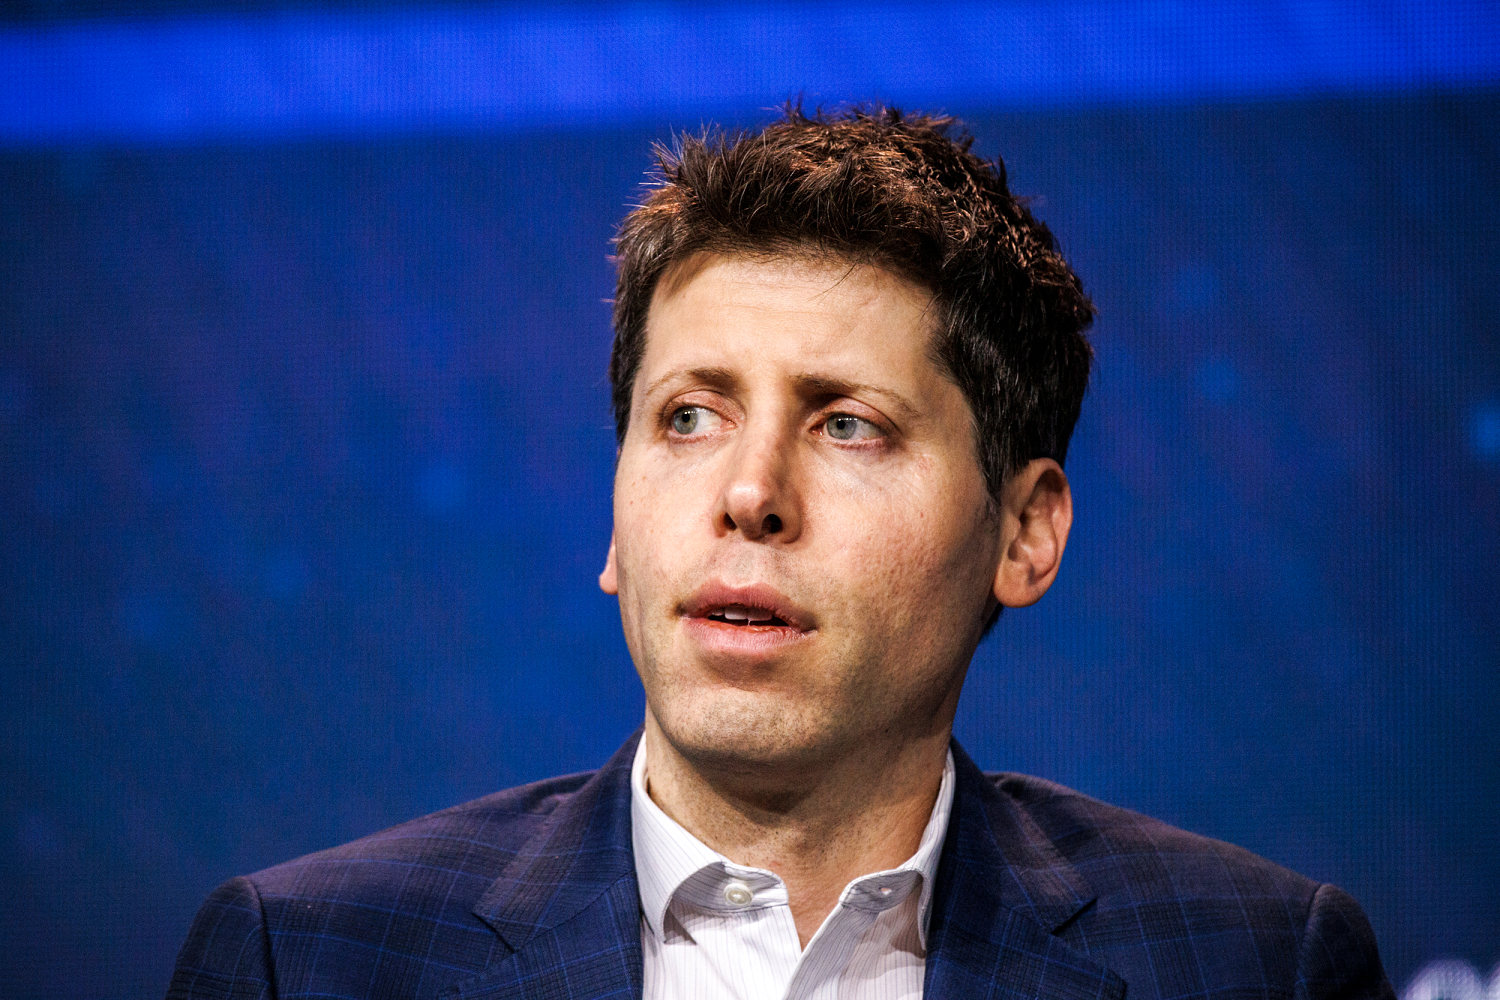 Sam Altman takes nuclear energy company Oklo public to help power his AI ambitions